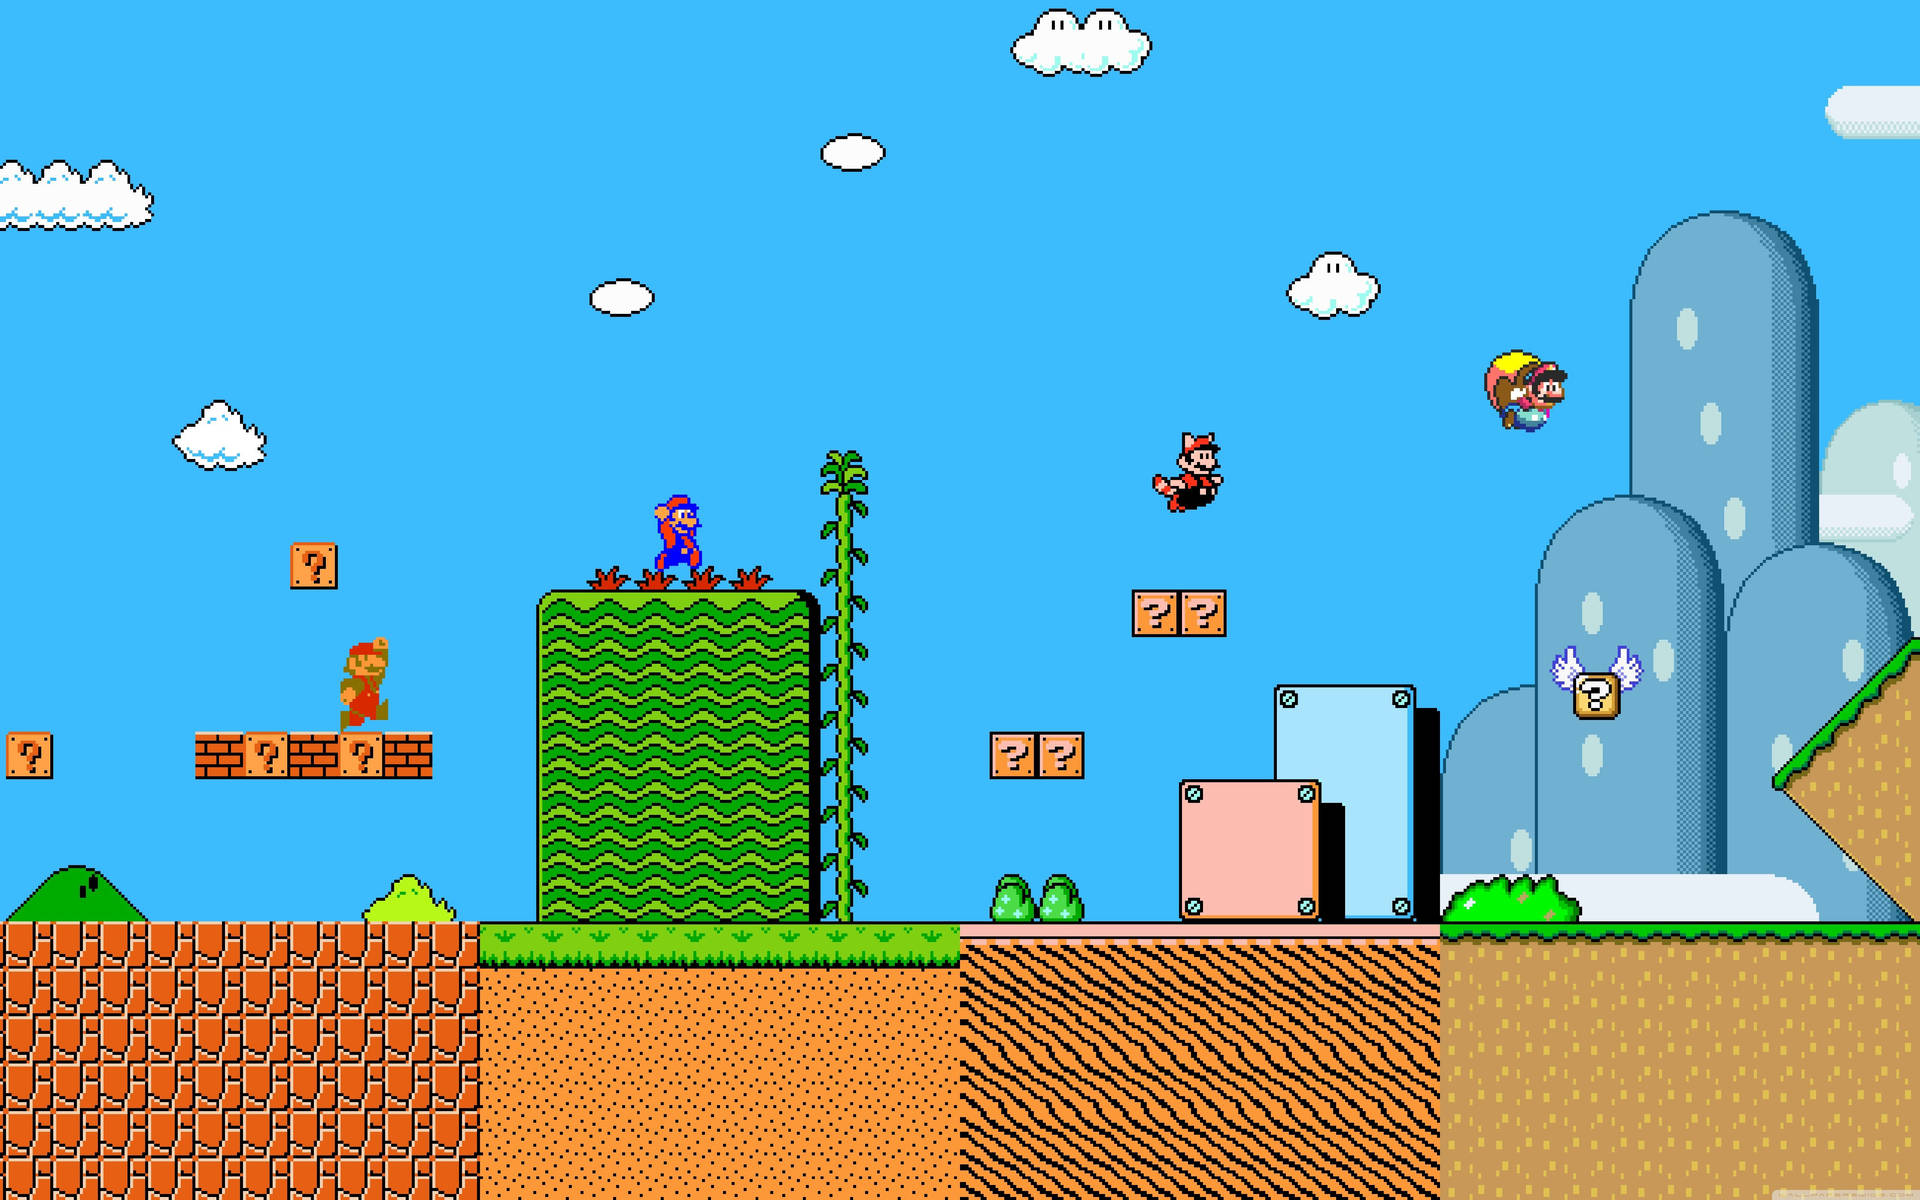 Celebrate the History of Super Mario with this Wallpaper Wallpaper